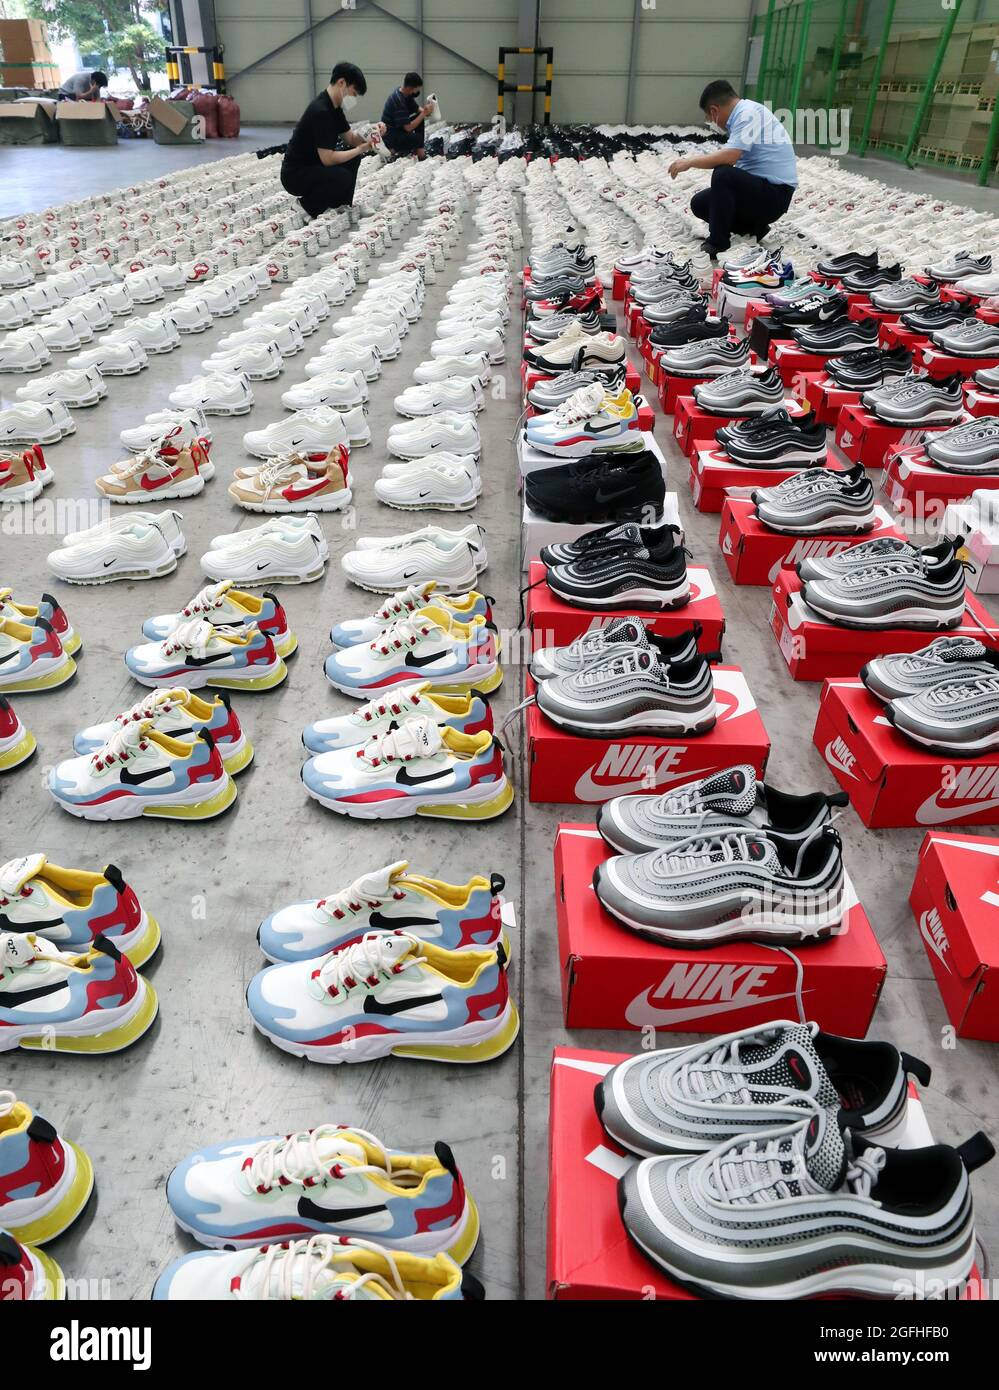 Korea. 26th Aug, 2021. 26th Aug, 2021. Fake designer sneakers seized Busan Customs officials display thousands of fake sneakers of Nike and other foreign brands they have confiscated at a warehouse